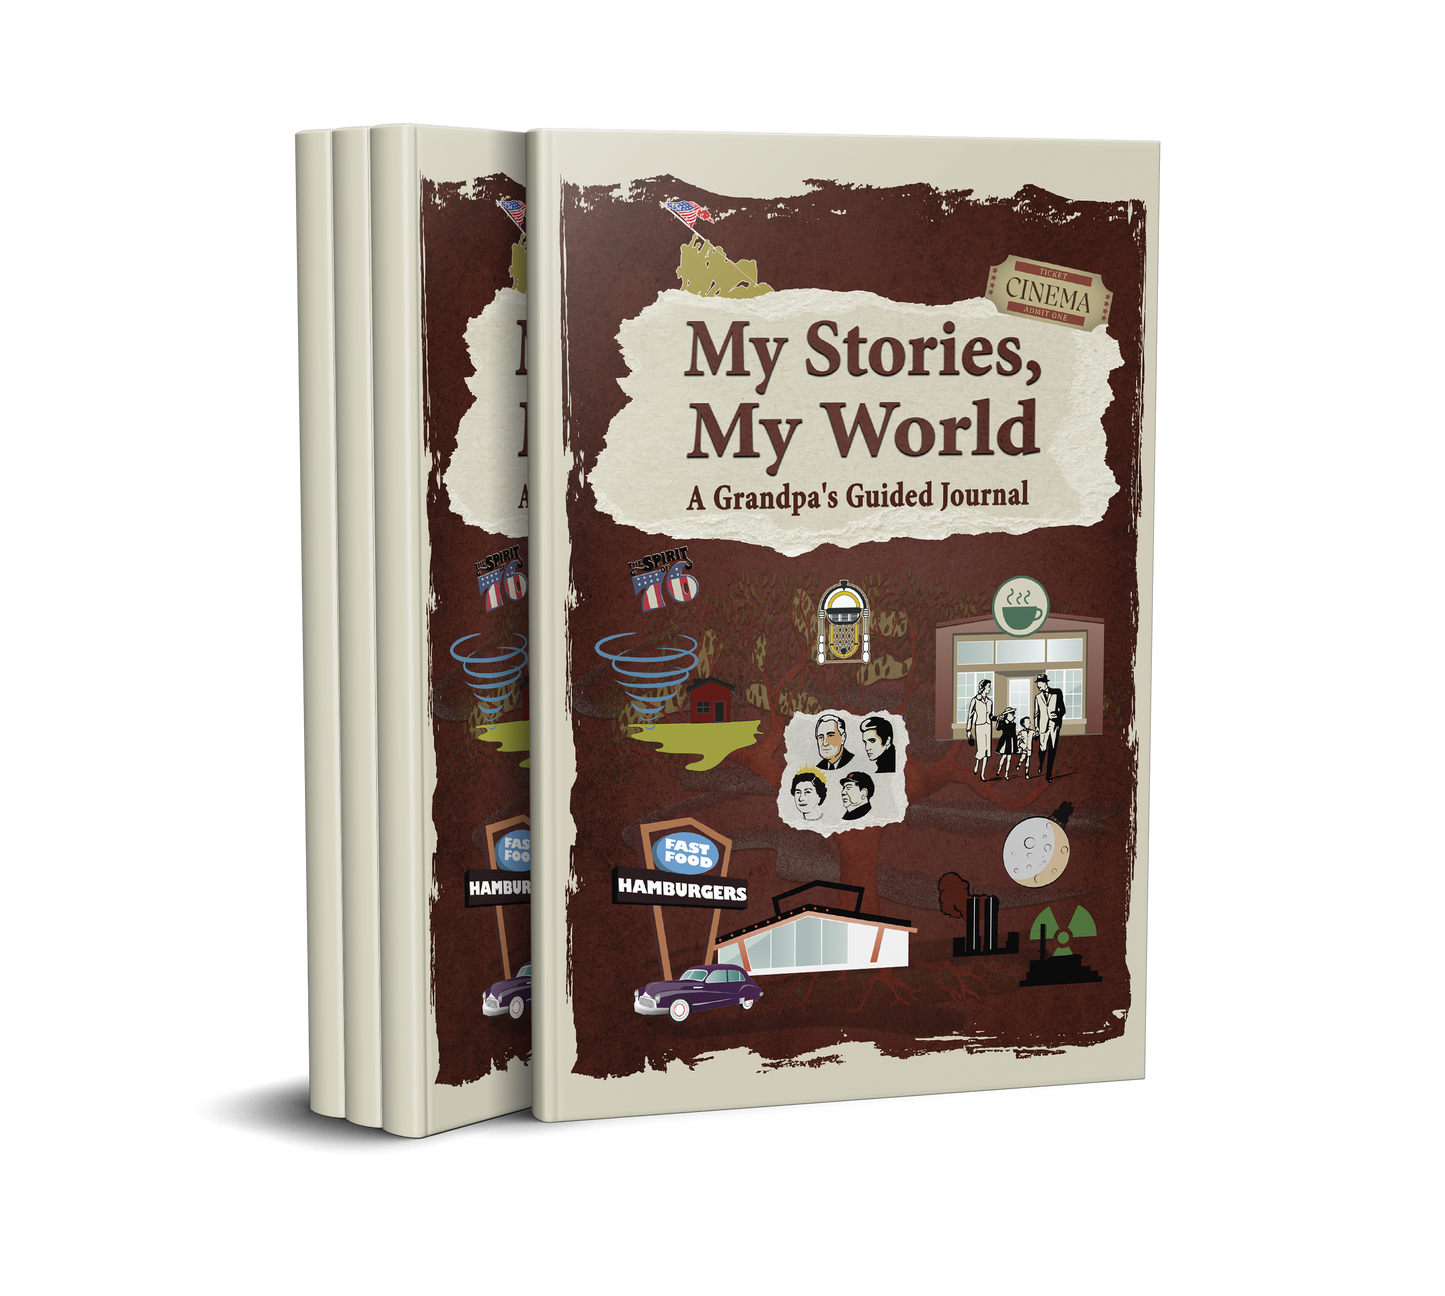 My Stories, My World: A Grandpa's Guided Journal